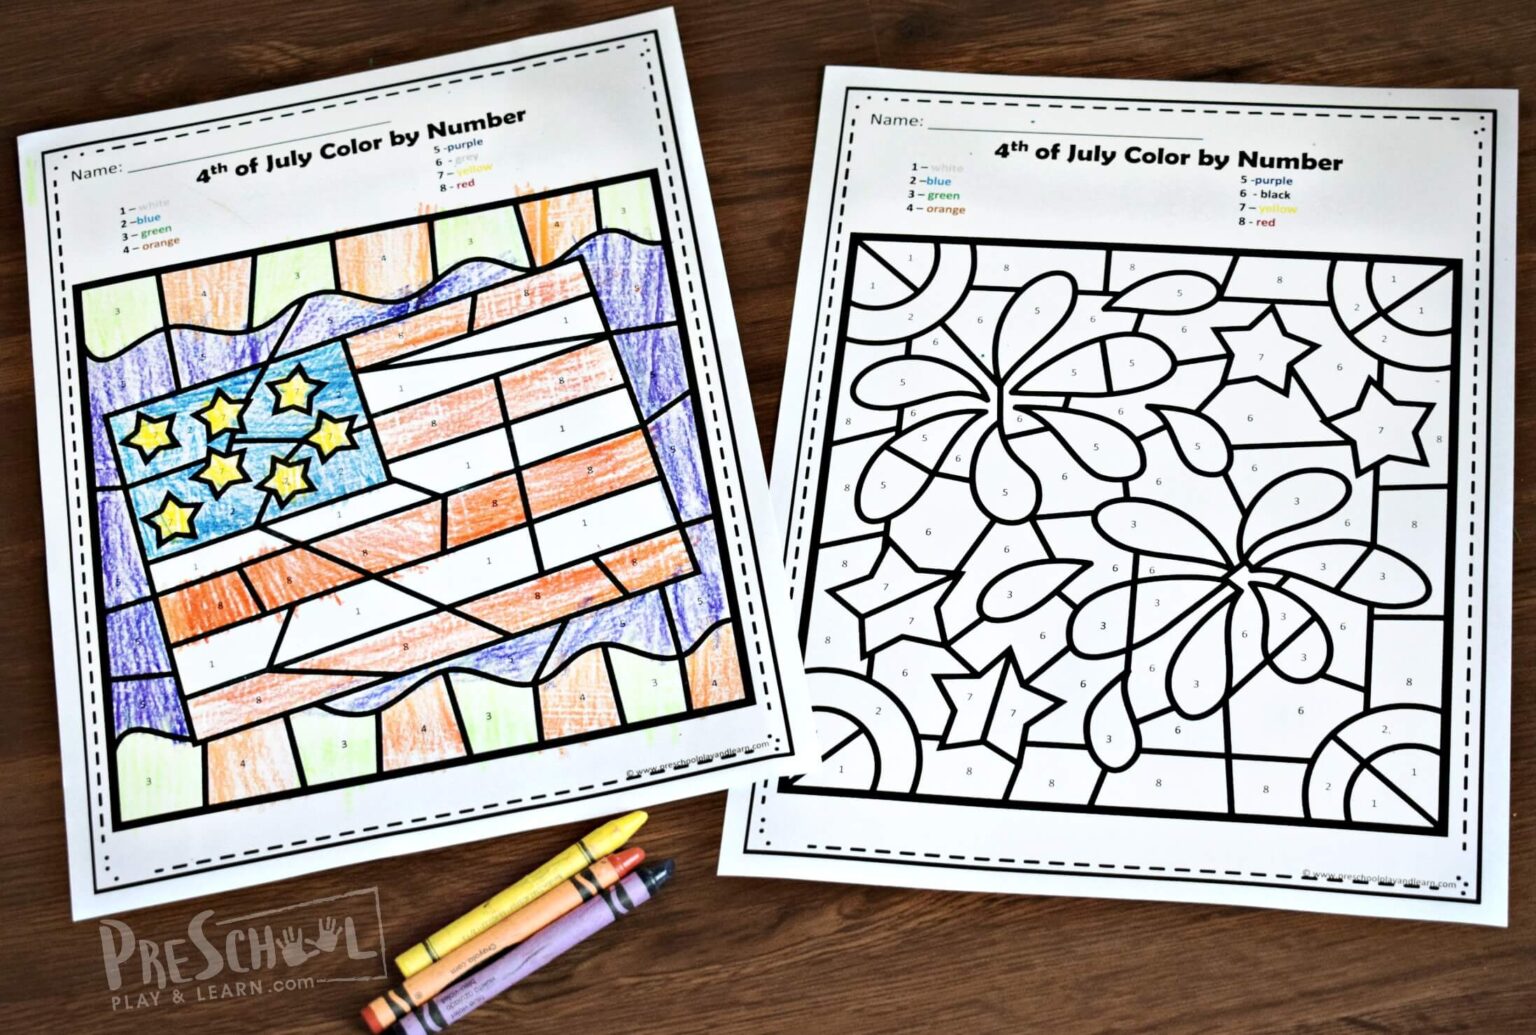 free-4th-of-july-color-by-number-printable-worksheets